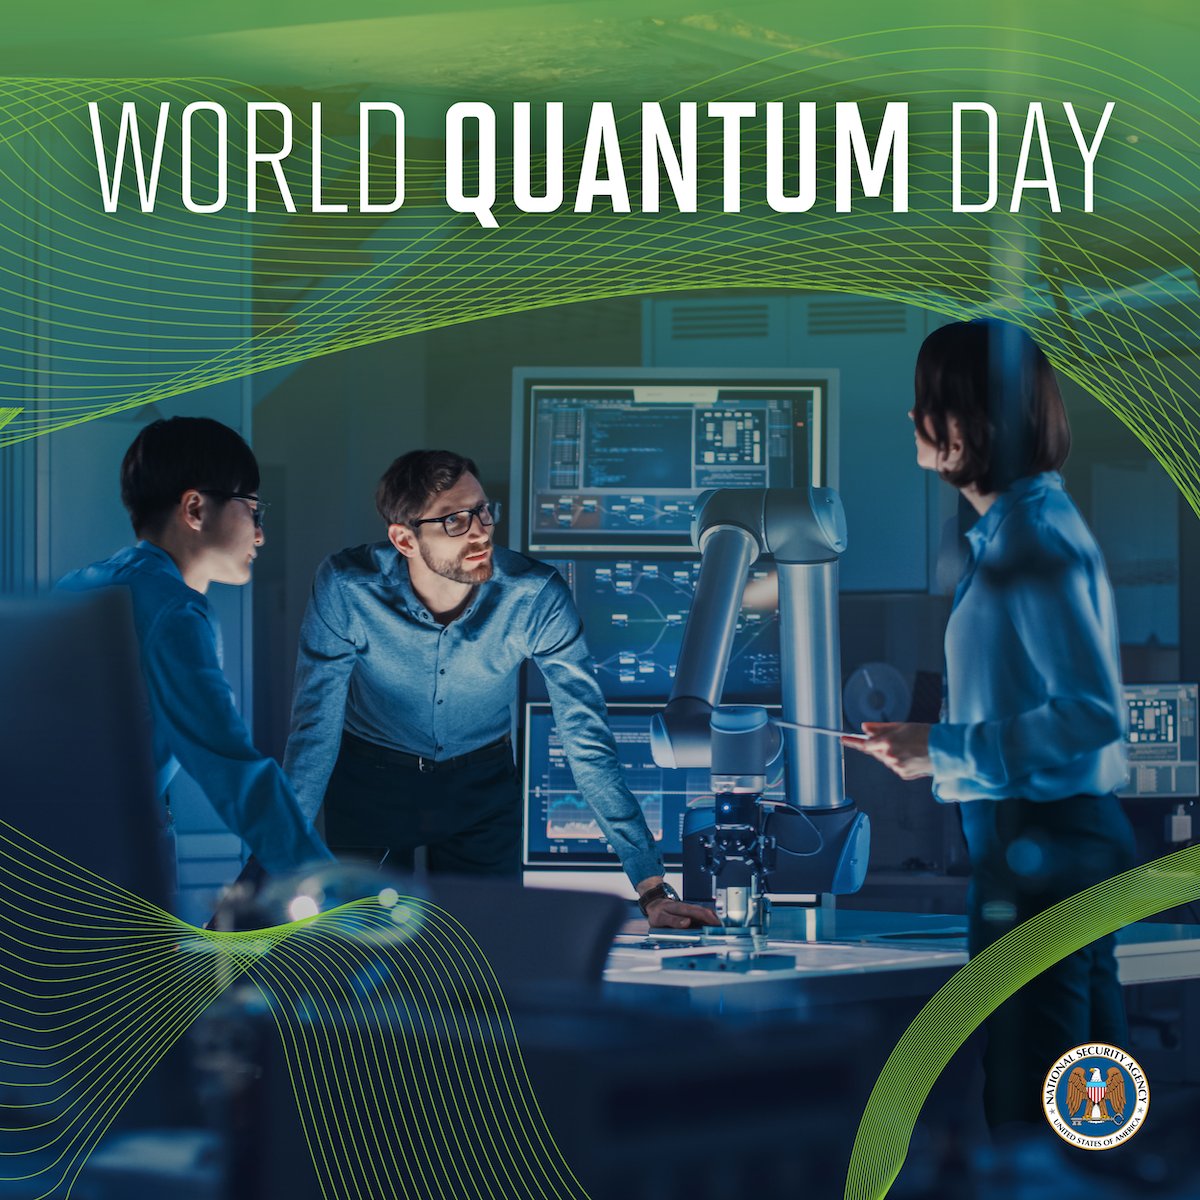 Happy #WorldQuantumDay to NSA’s growing group of quantum researchers. Apply to join the team: bit.ly/43rFxJP. #quantumresearch #quantumresearchjobs #quantumday